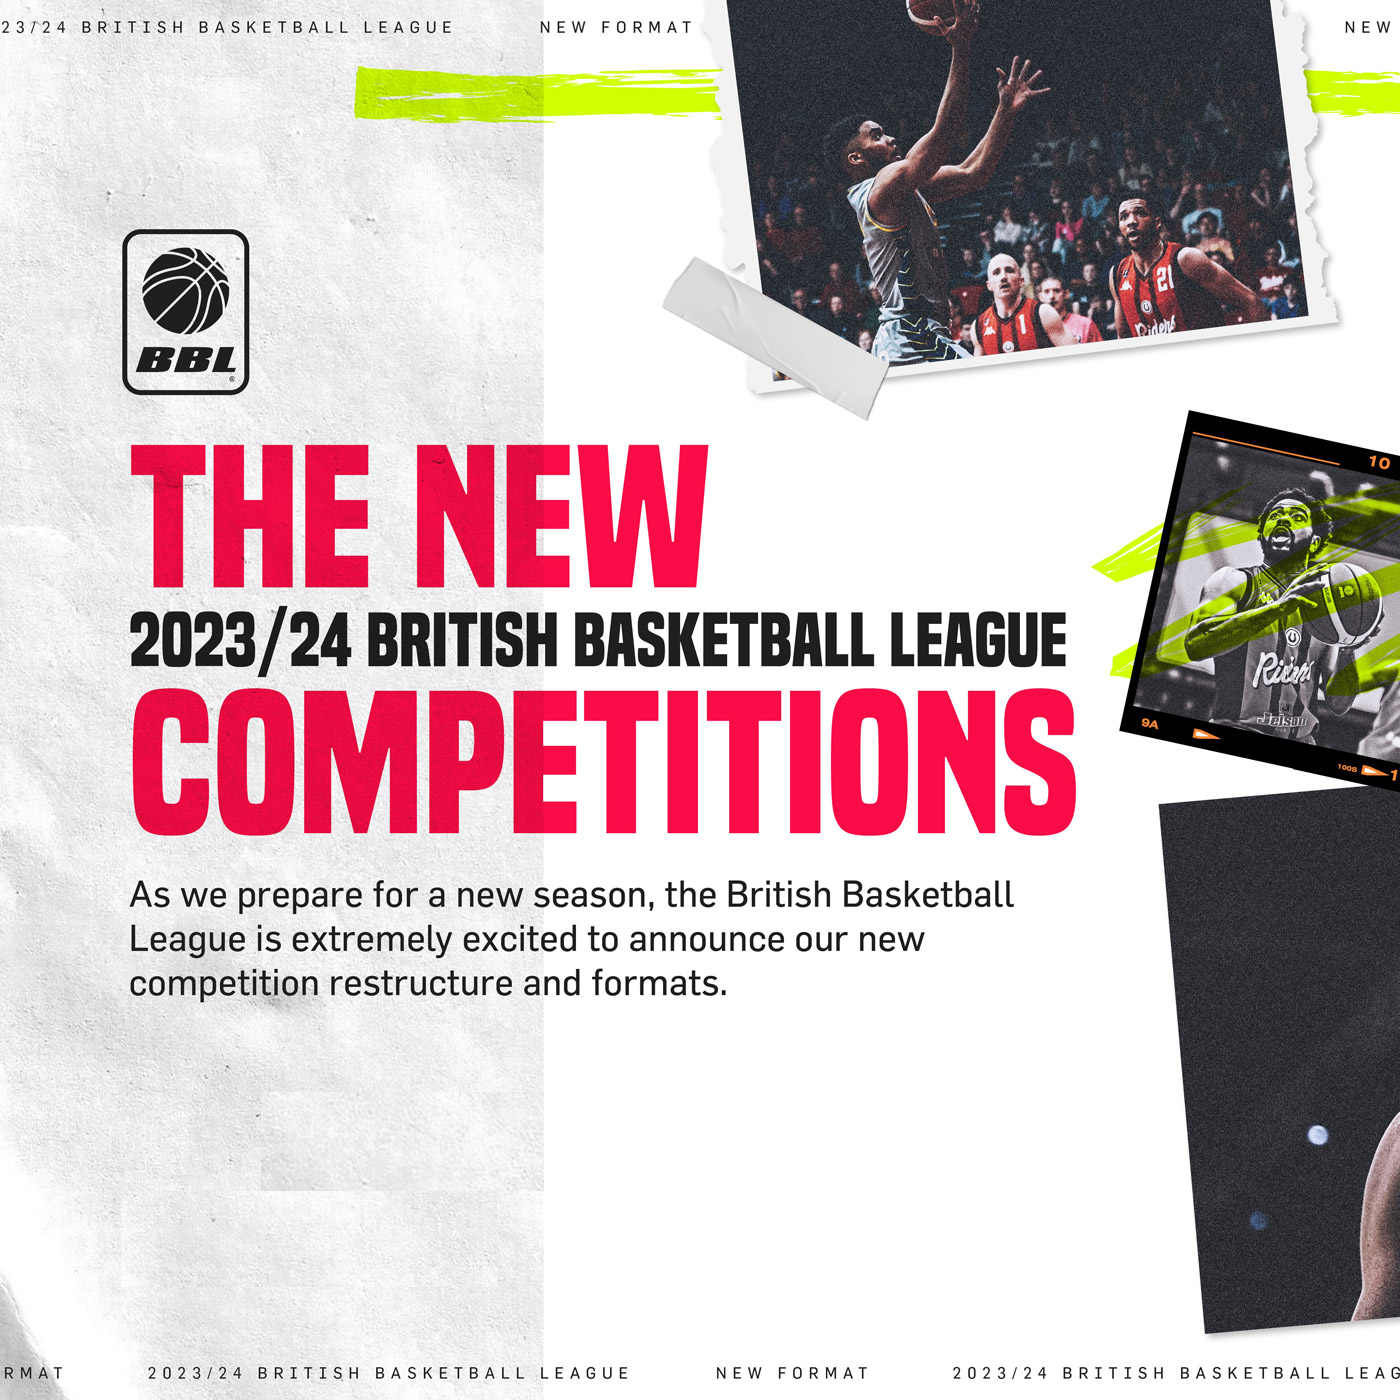 The British Basketball League Announces Exciting New Formats for the 2023/24 Season